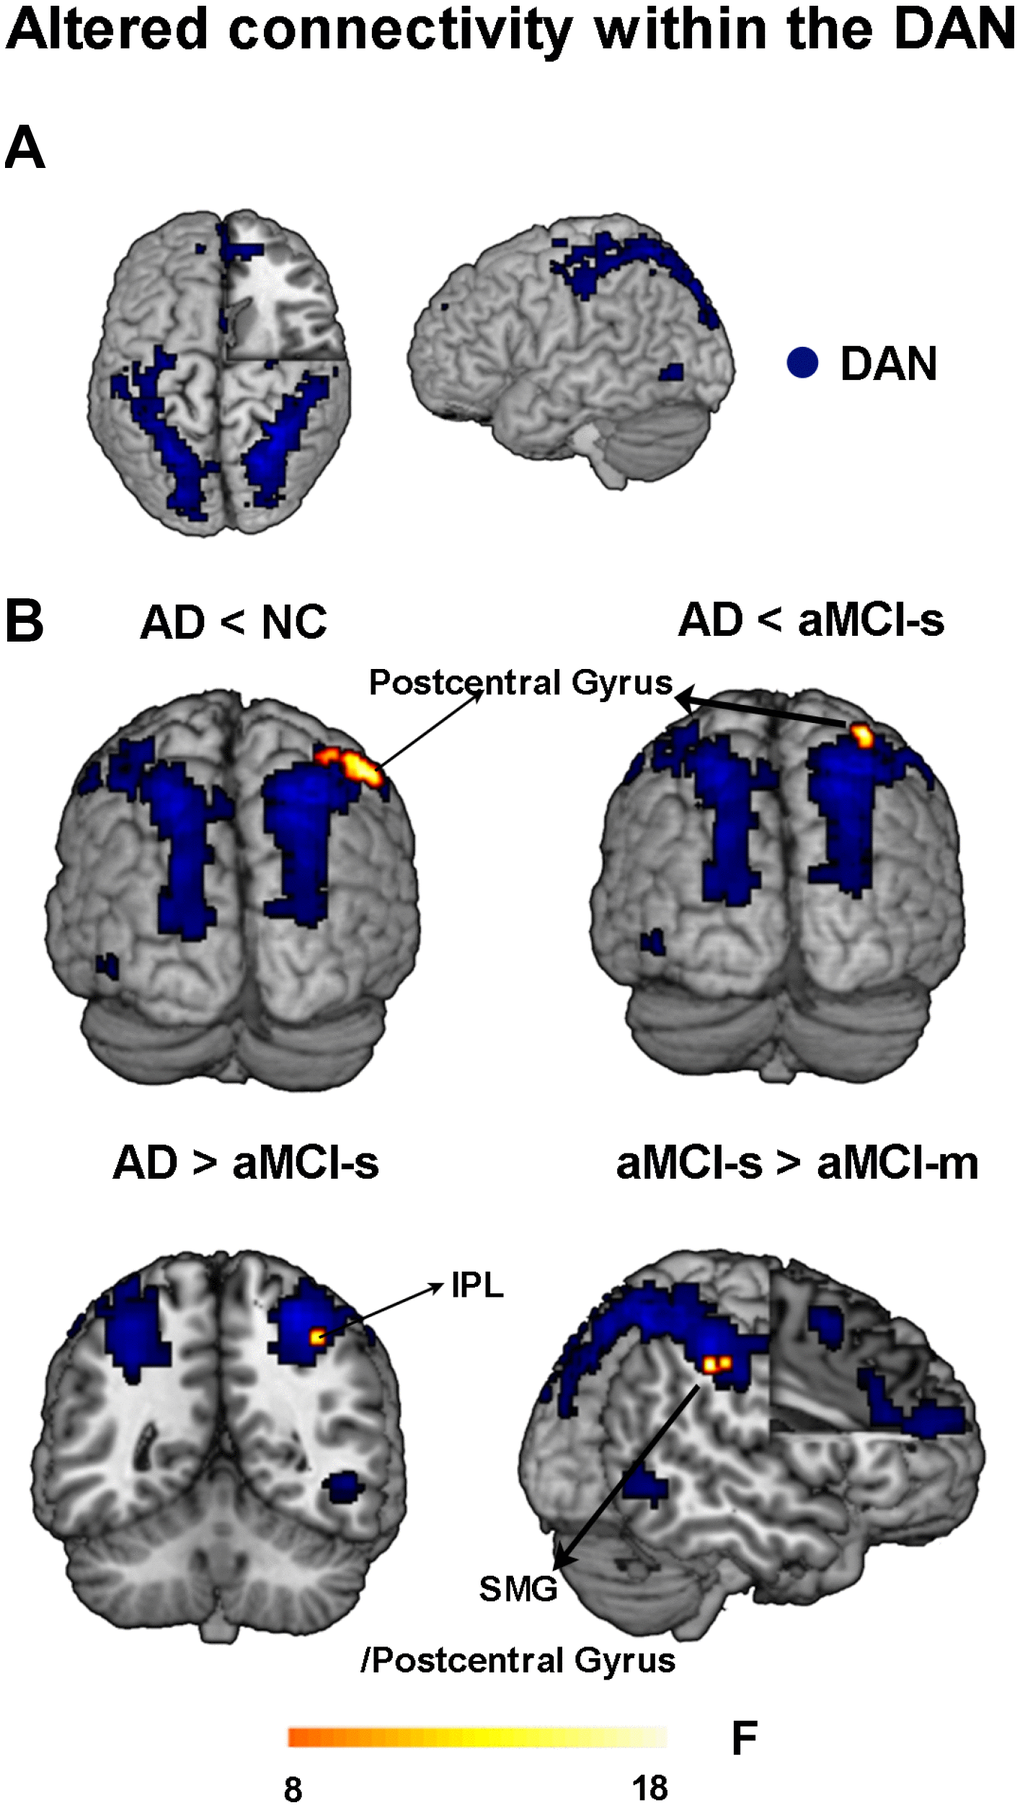 Altered functional connectivity within the DAN among the four groups. (A) Spatial distribution of the DAN (FWE correction). (B) Regions showing altered functional connectivity between different groups. Abbreviations: DAN: dorsal attention network; IPL: inferior parietal lobule; SMG: supramarginal gyrus; AD: Alzheimer's disease; aMCI-s: single-domain of amnestic mild cognitive impairment; aMCI-m: multiple-domain of amnestic mild cognitive impairment; NC: normal controls.